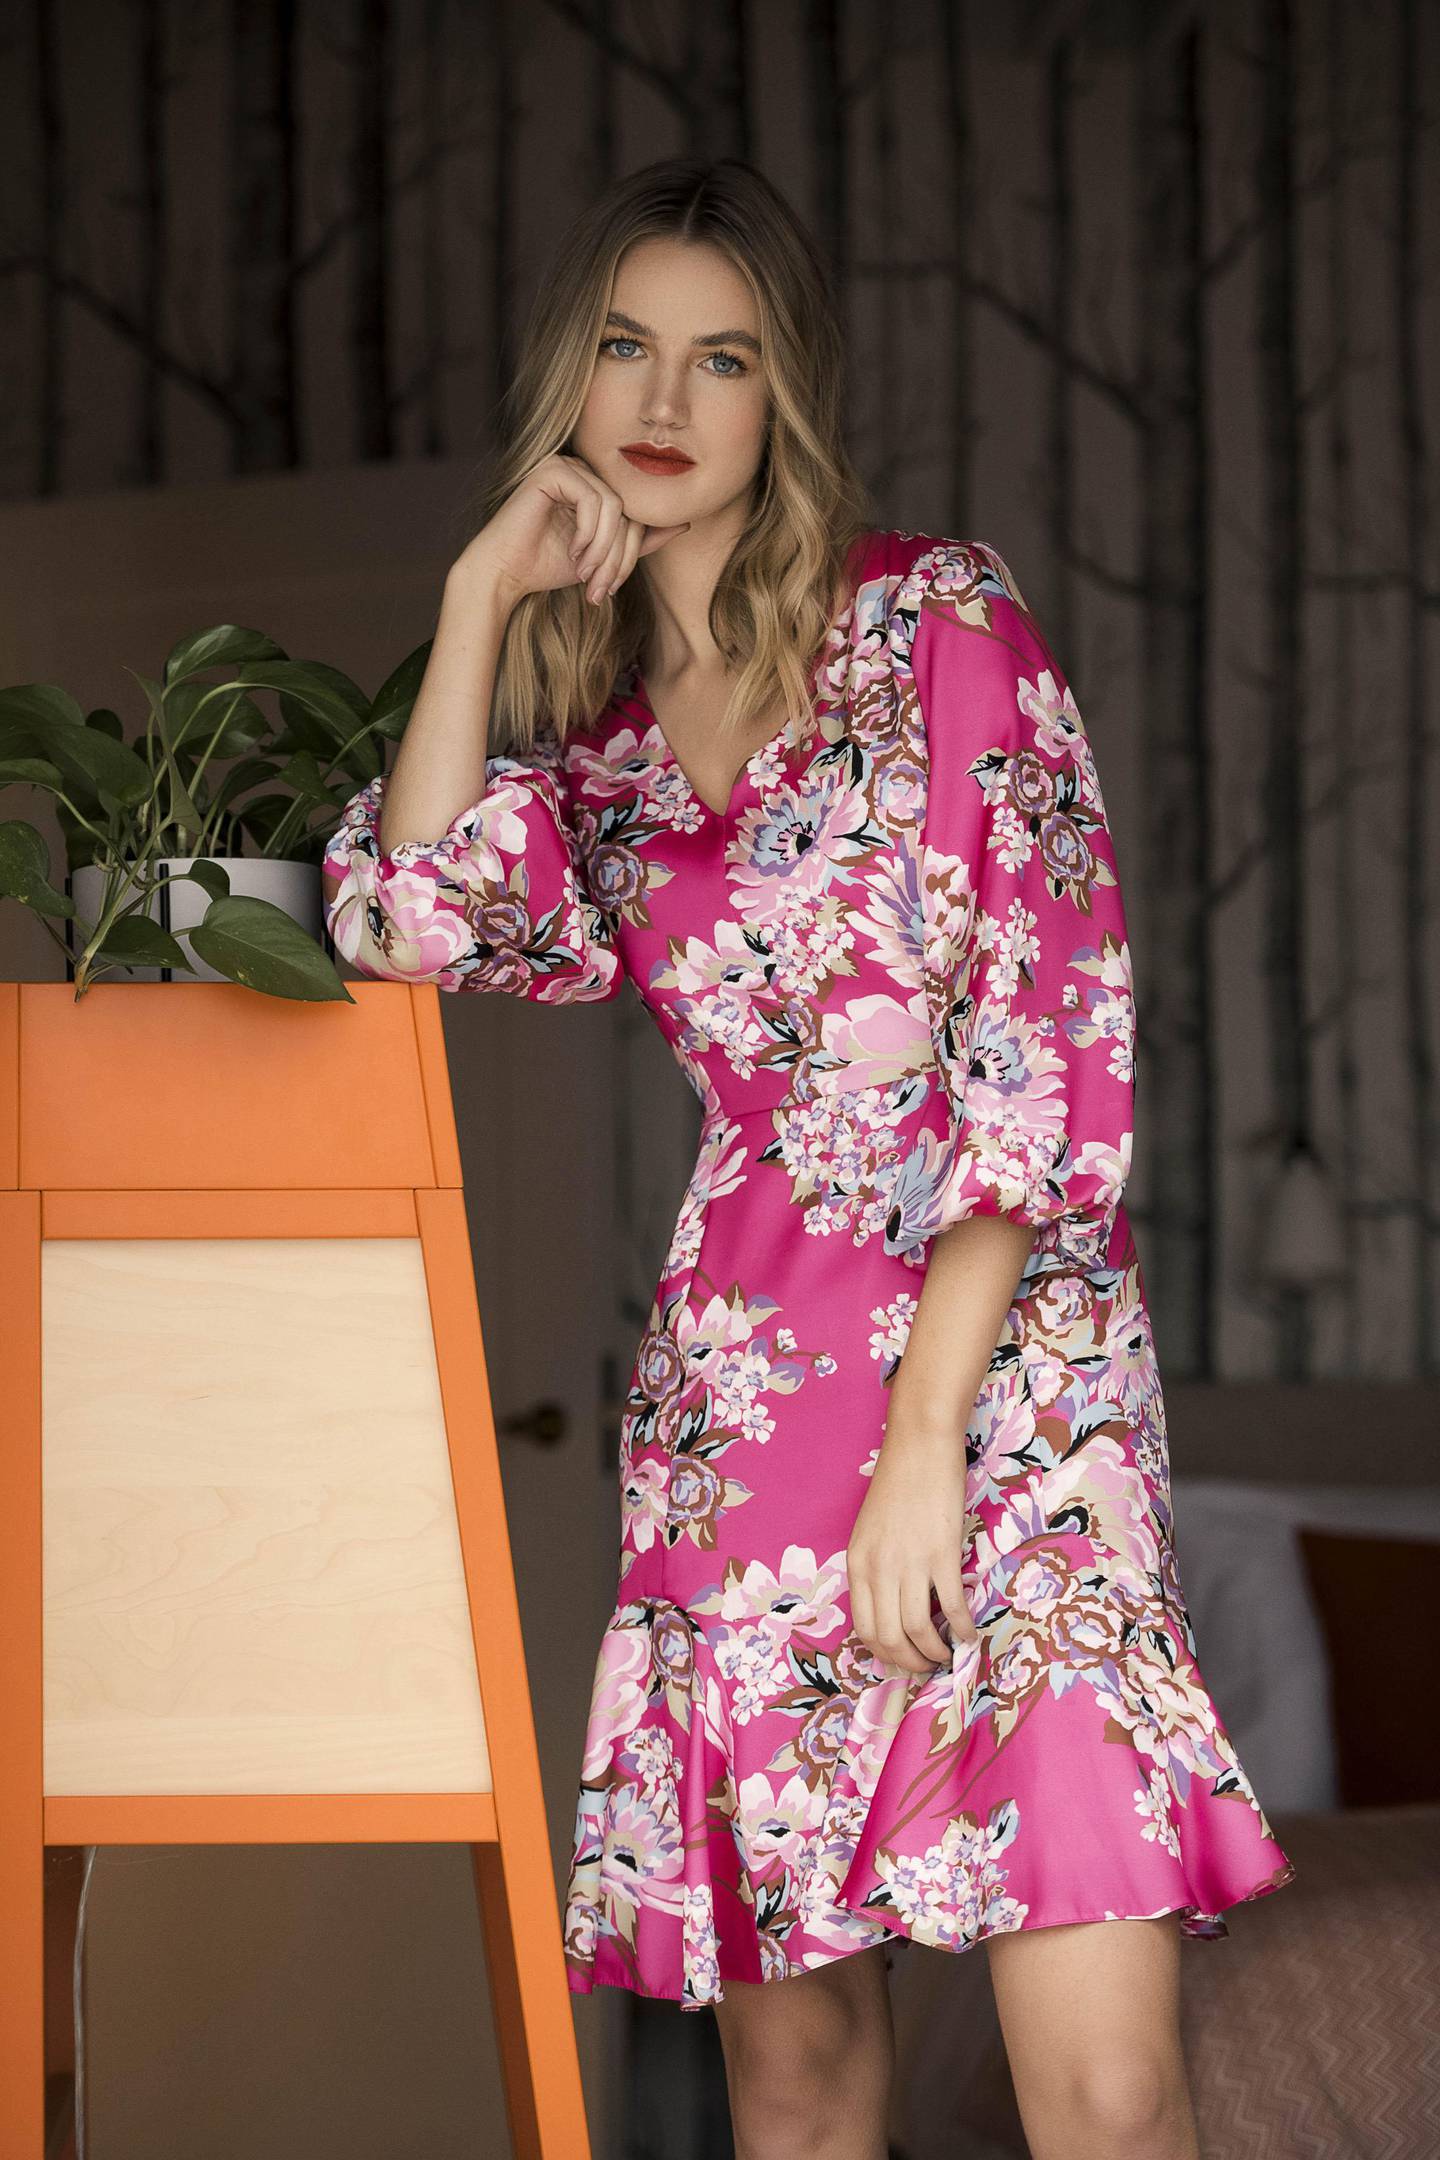 Spring dresses to dream about, whether you like them flirty or feminine ...